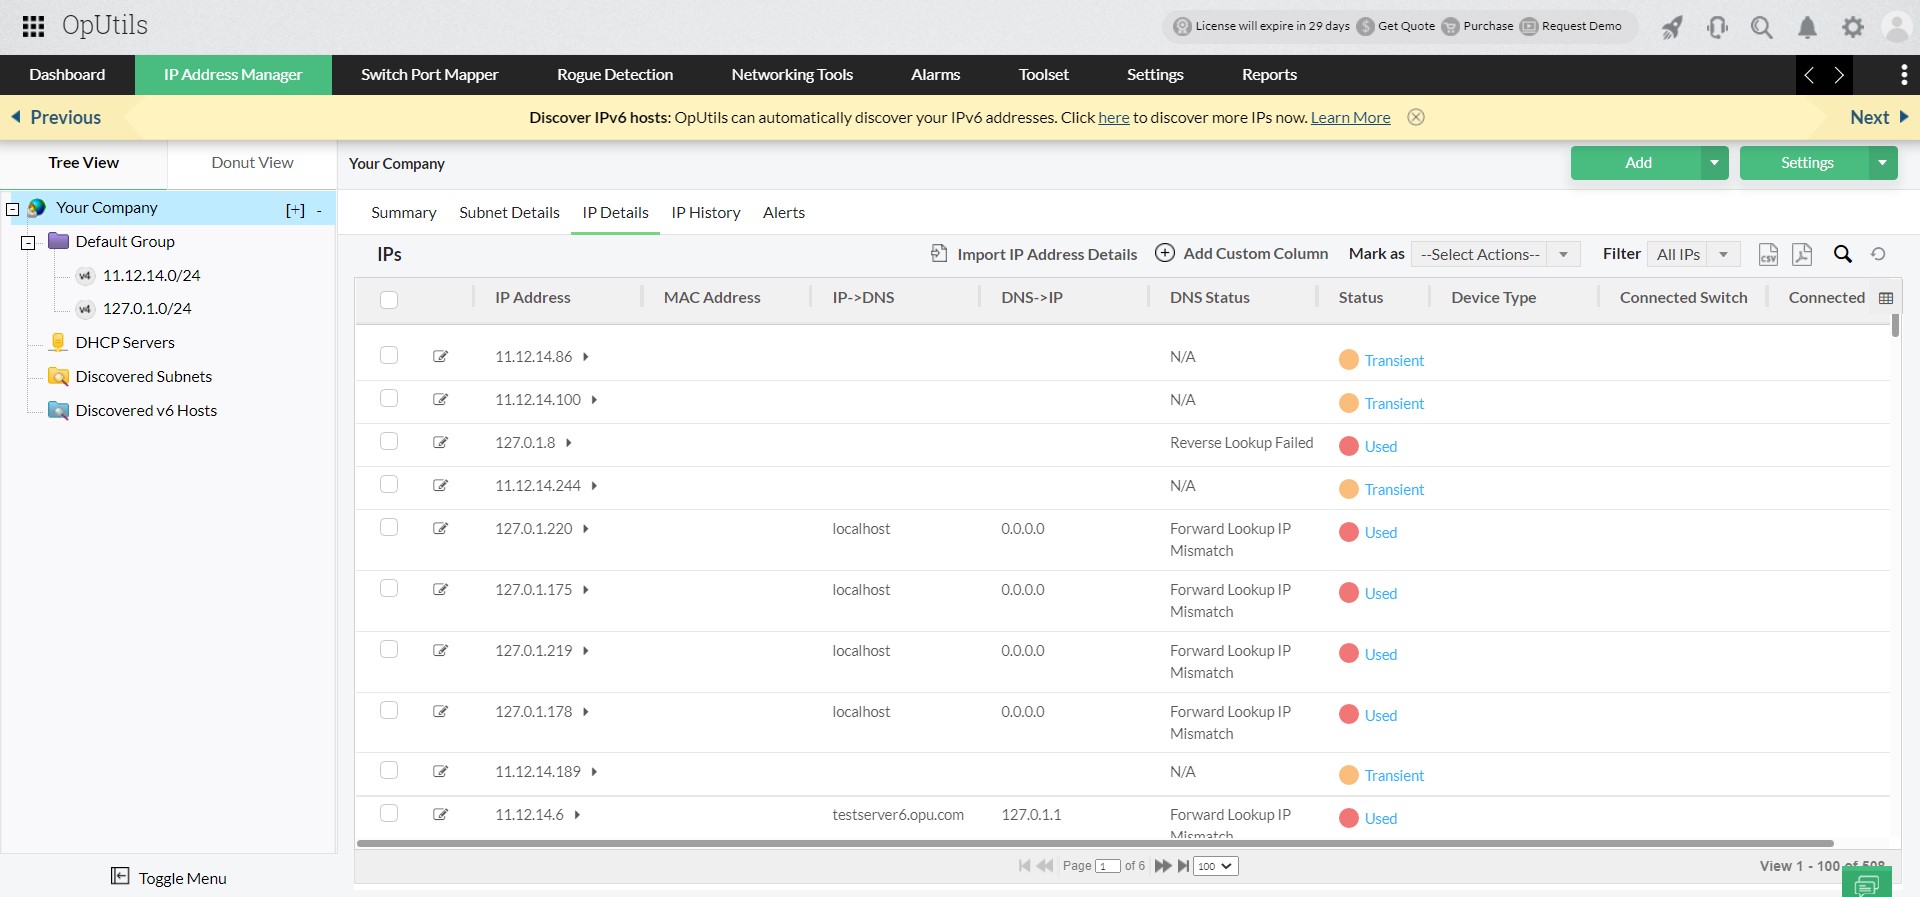 Inspect comprehensive IP utilization details with a hassle-free IP address tracking solution